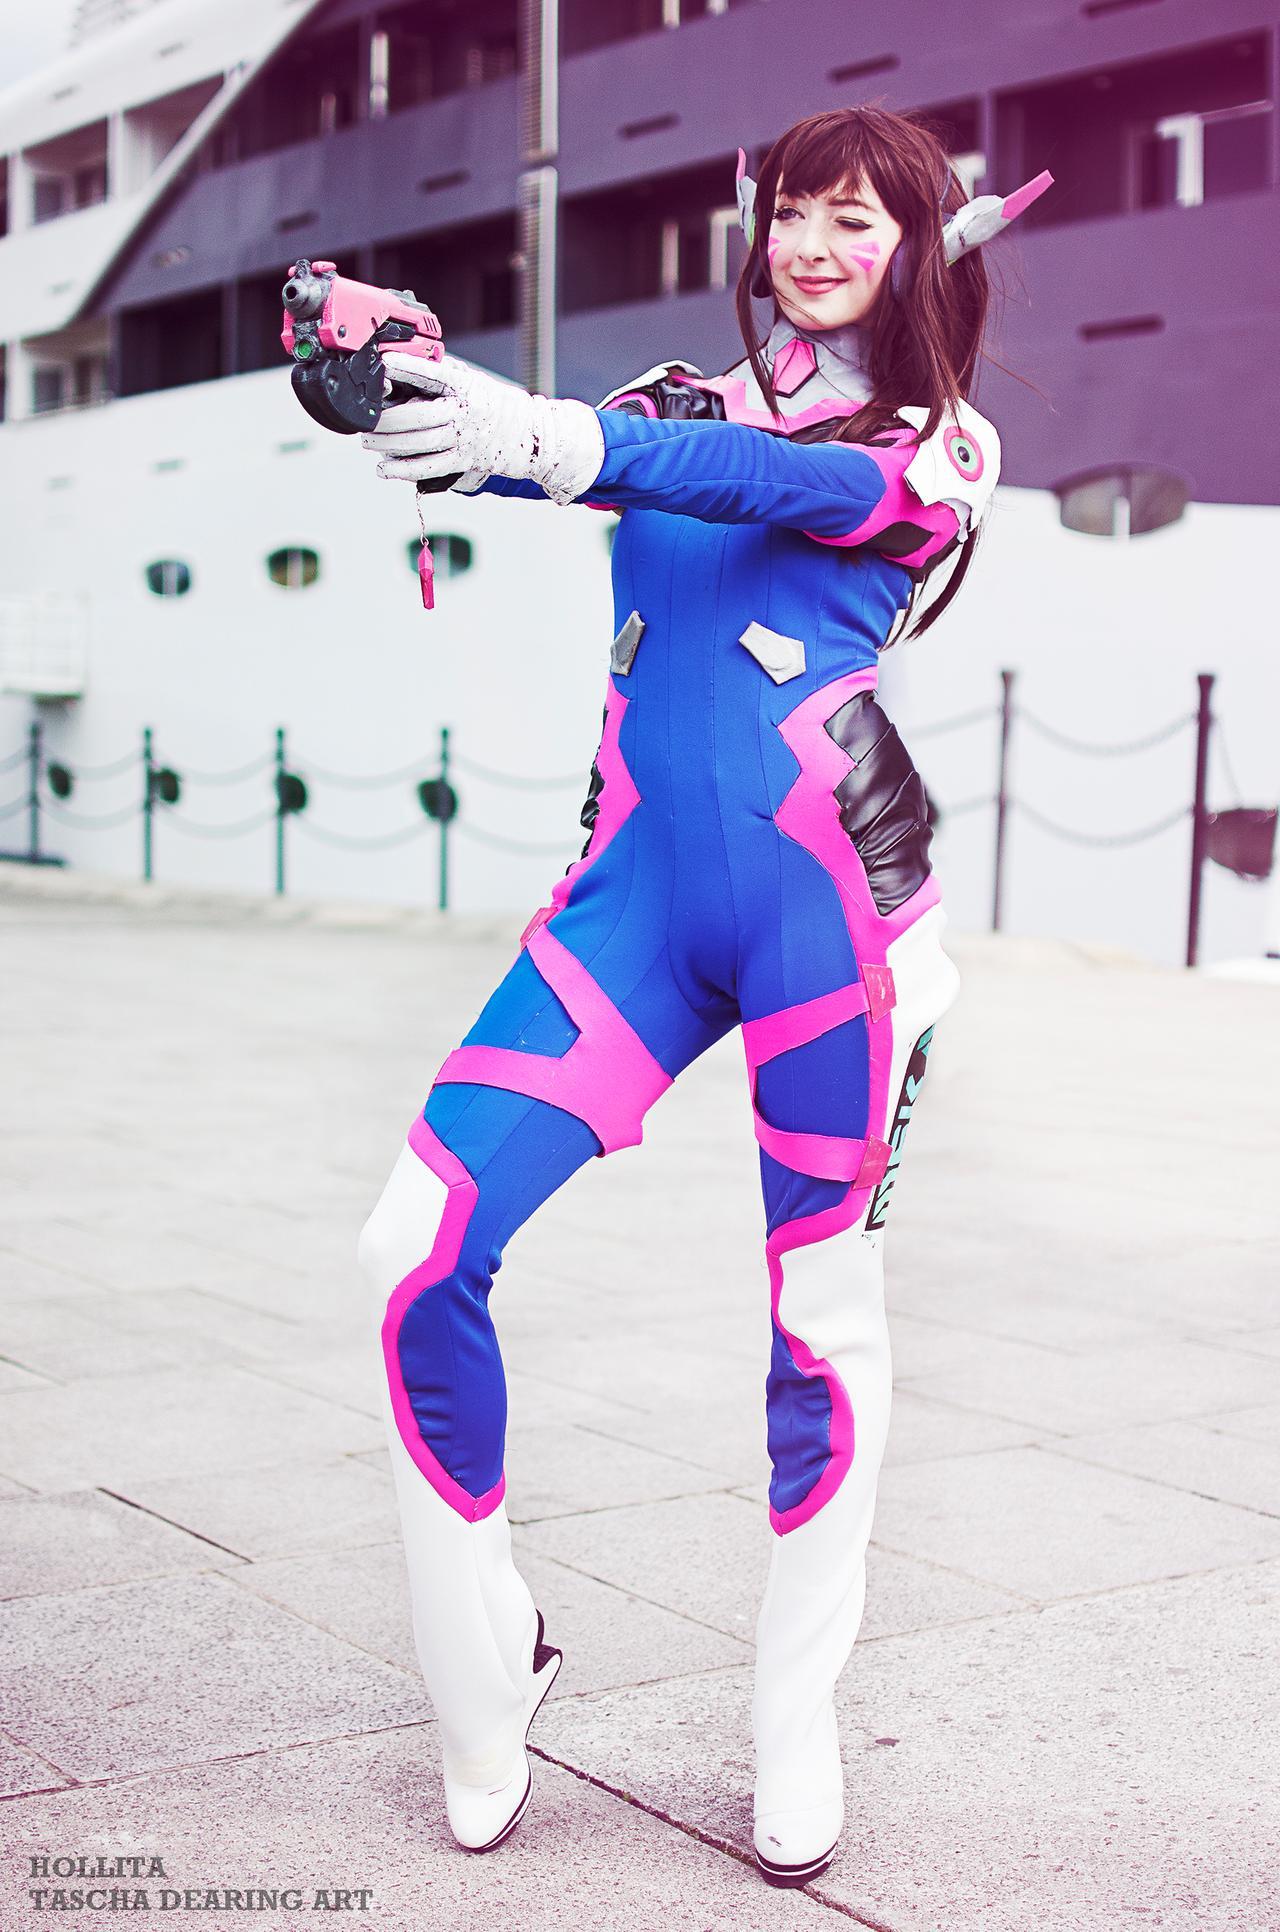 70+ Hot Pictures Of D.Va From Overwatch 34